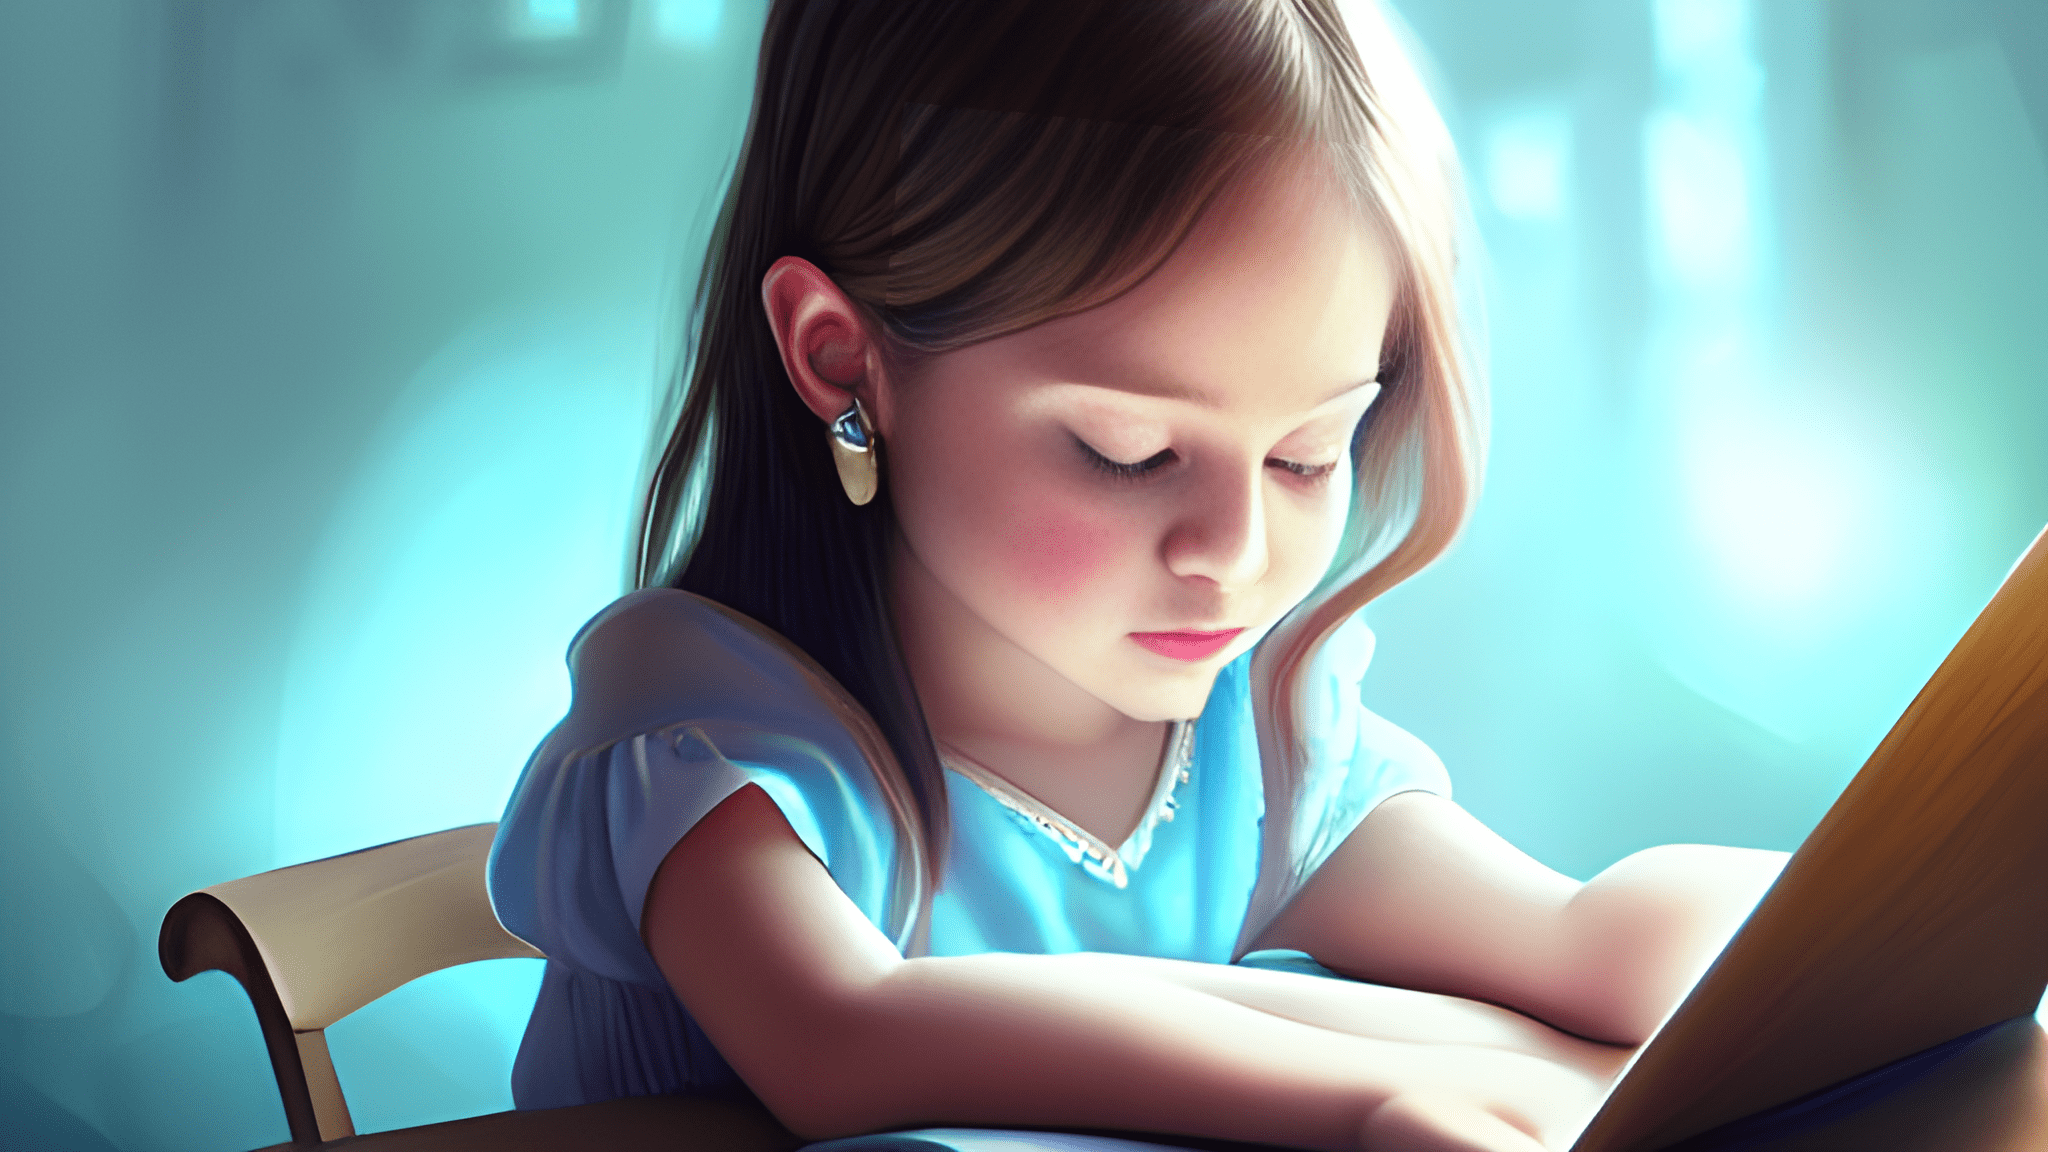 A little girl is studying in front of a computer screen